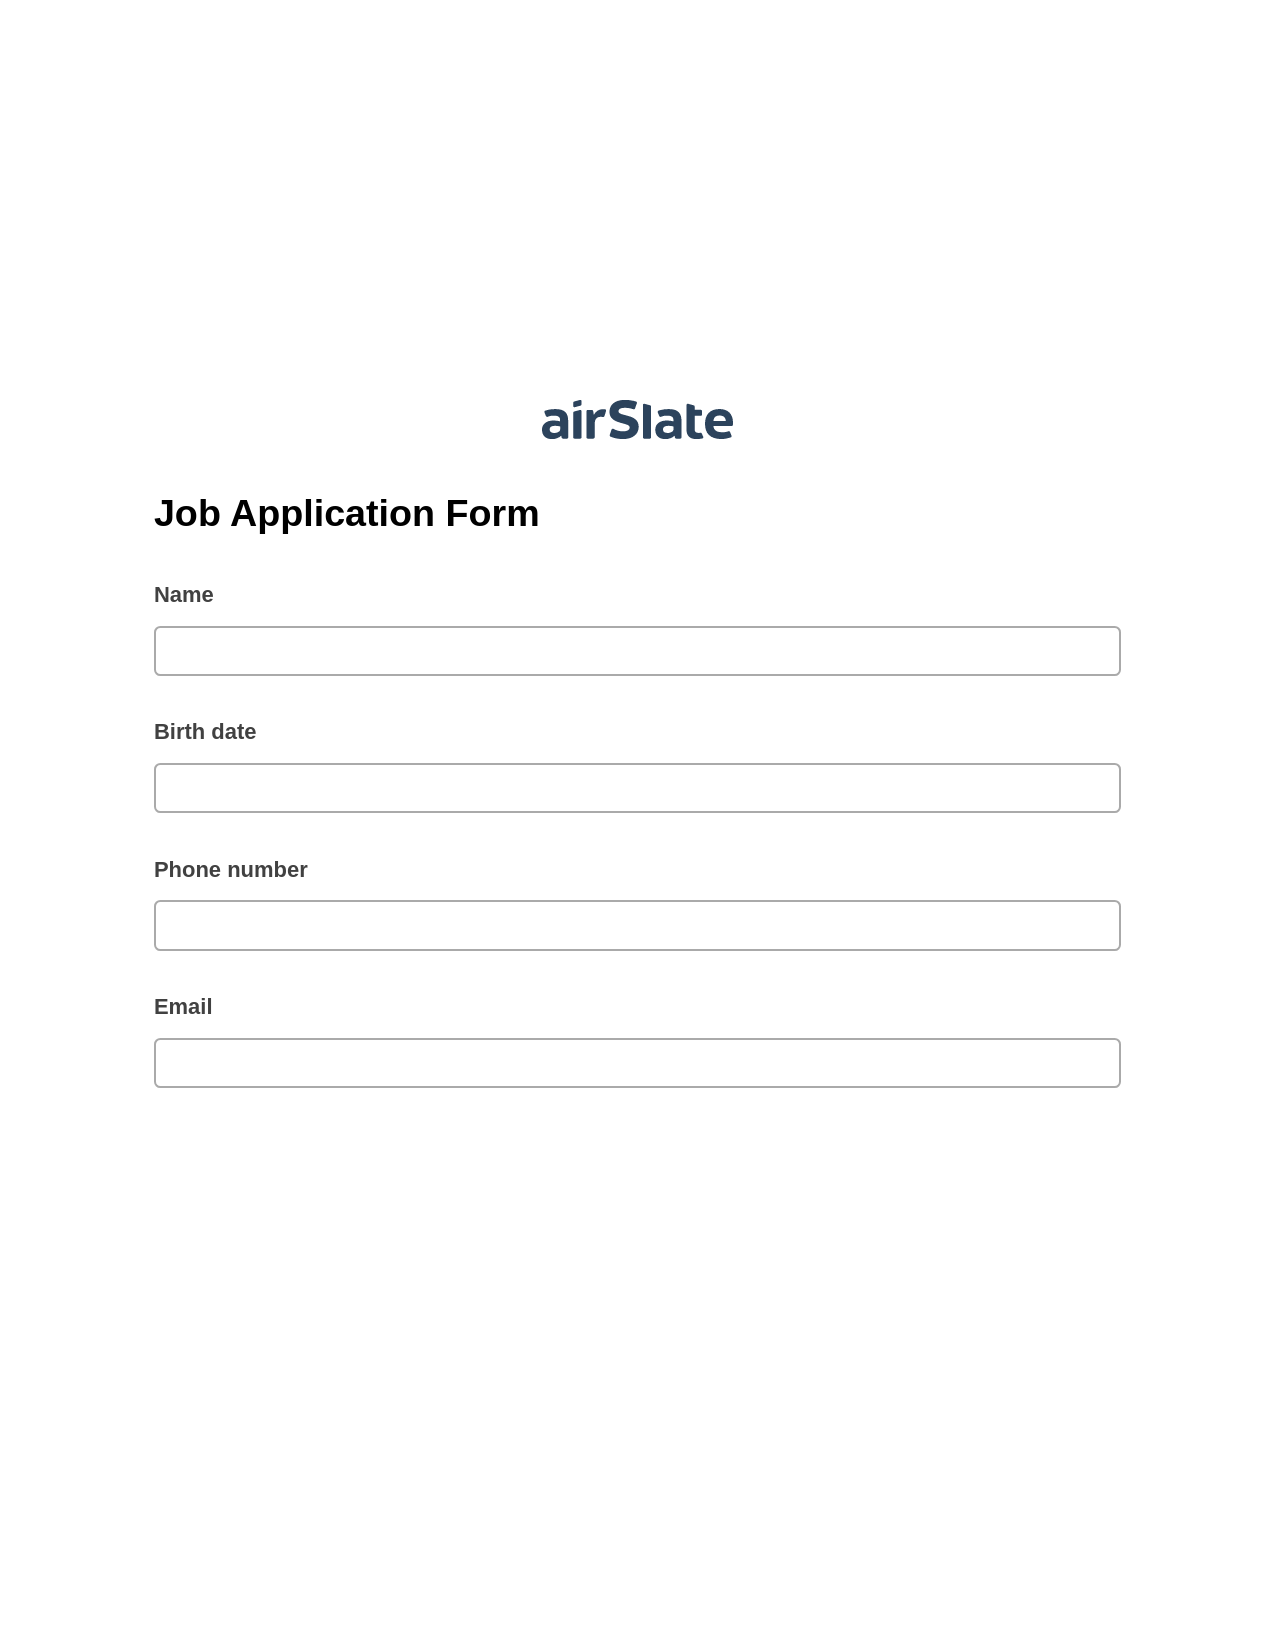 Multirole Job Application Form Pre-fill from Salesforce Records with SOQL Bot, Create slate bot, Box Bot